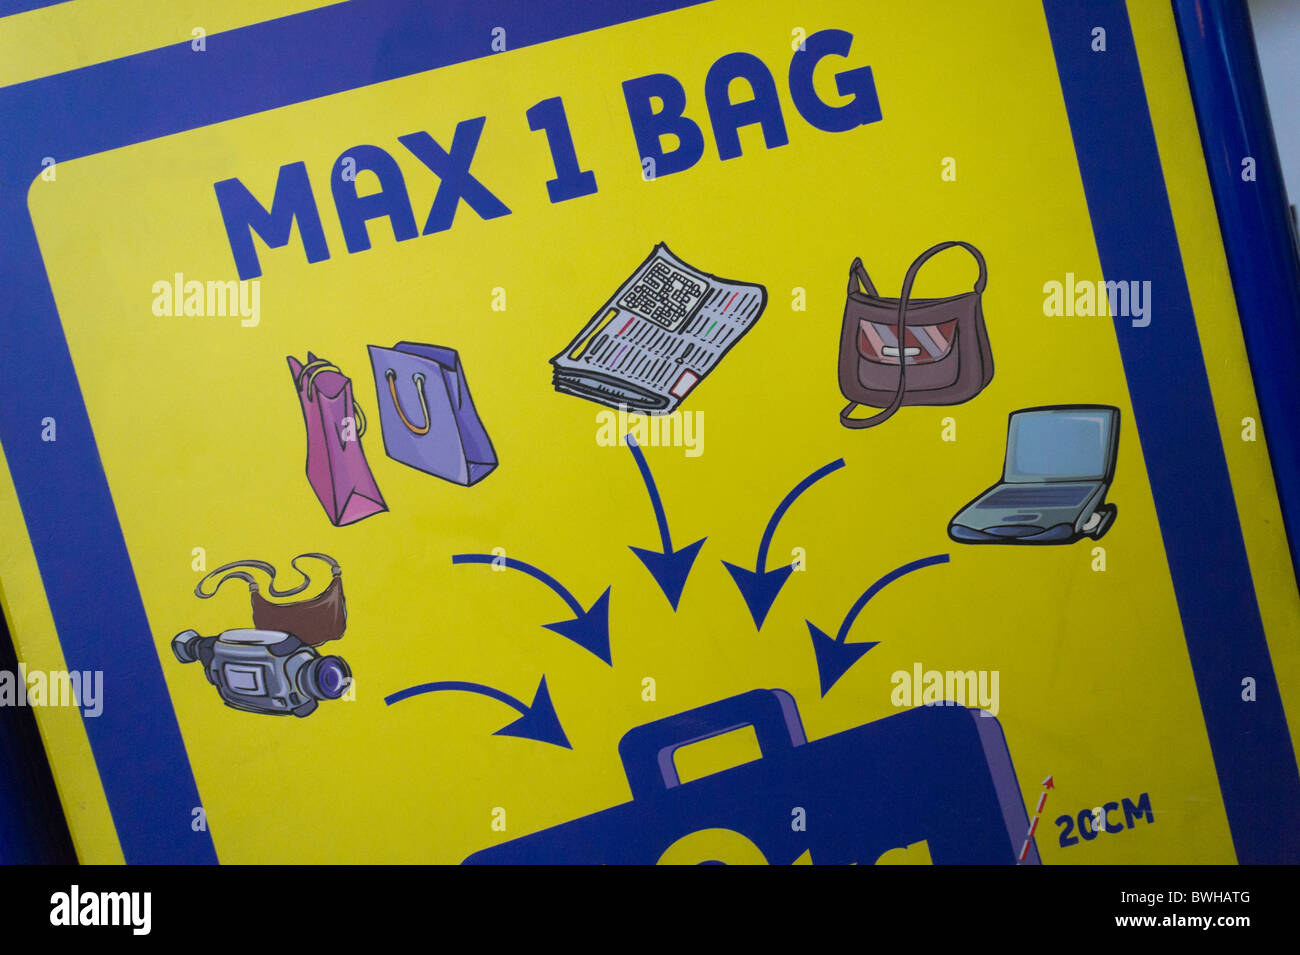 Airport carry-on cabin bag limits, Ryanair sign. Stock Photo